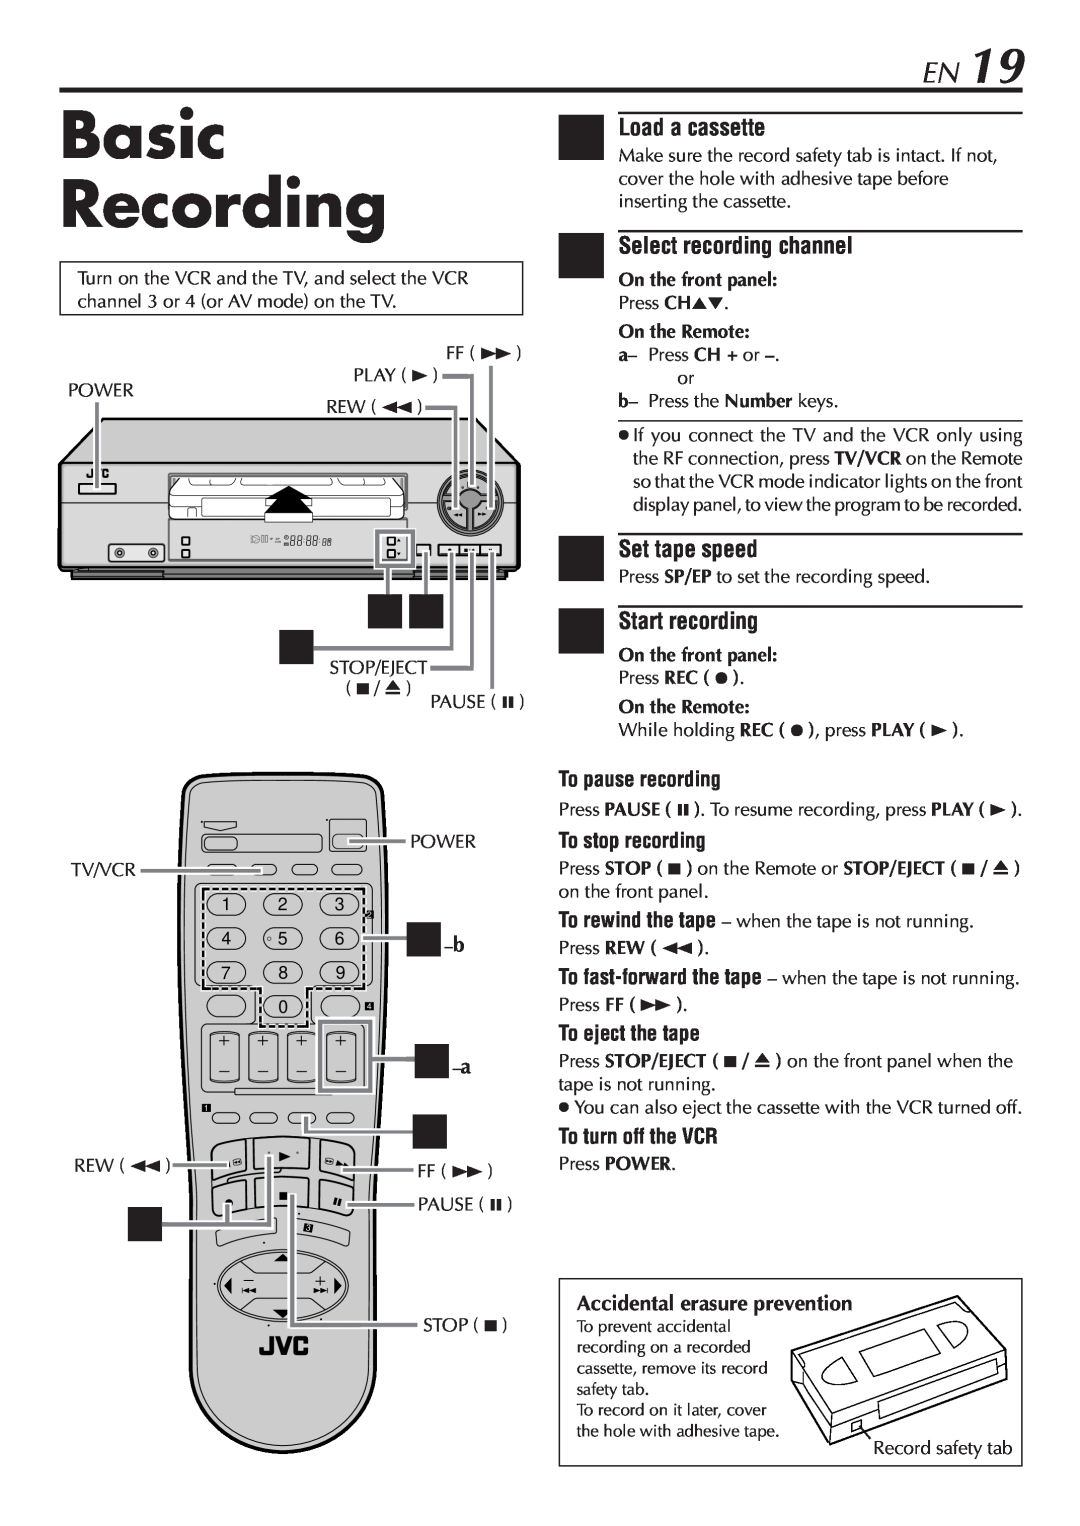 JVC HR-A47U manual Basic Recording, 2Select recording channel, Set tape speed, Start recording, Load a cassette 